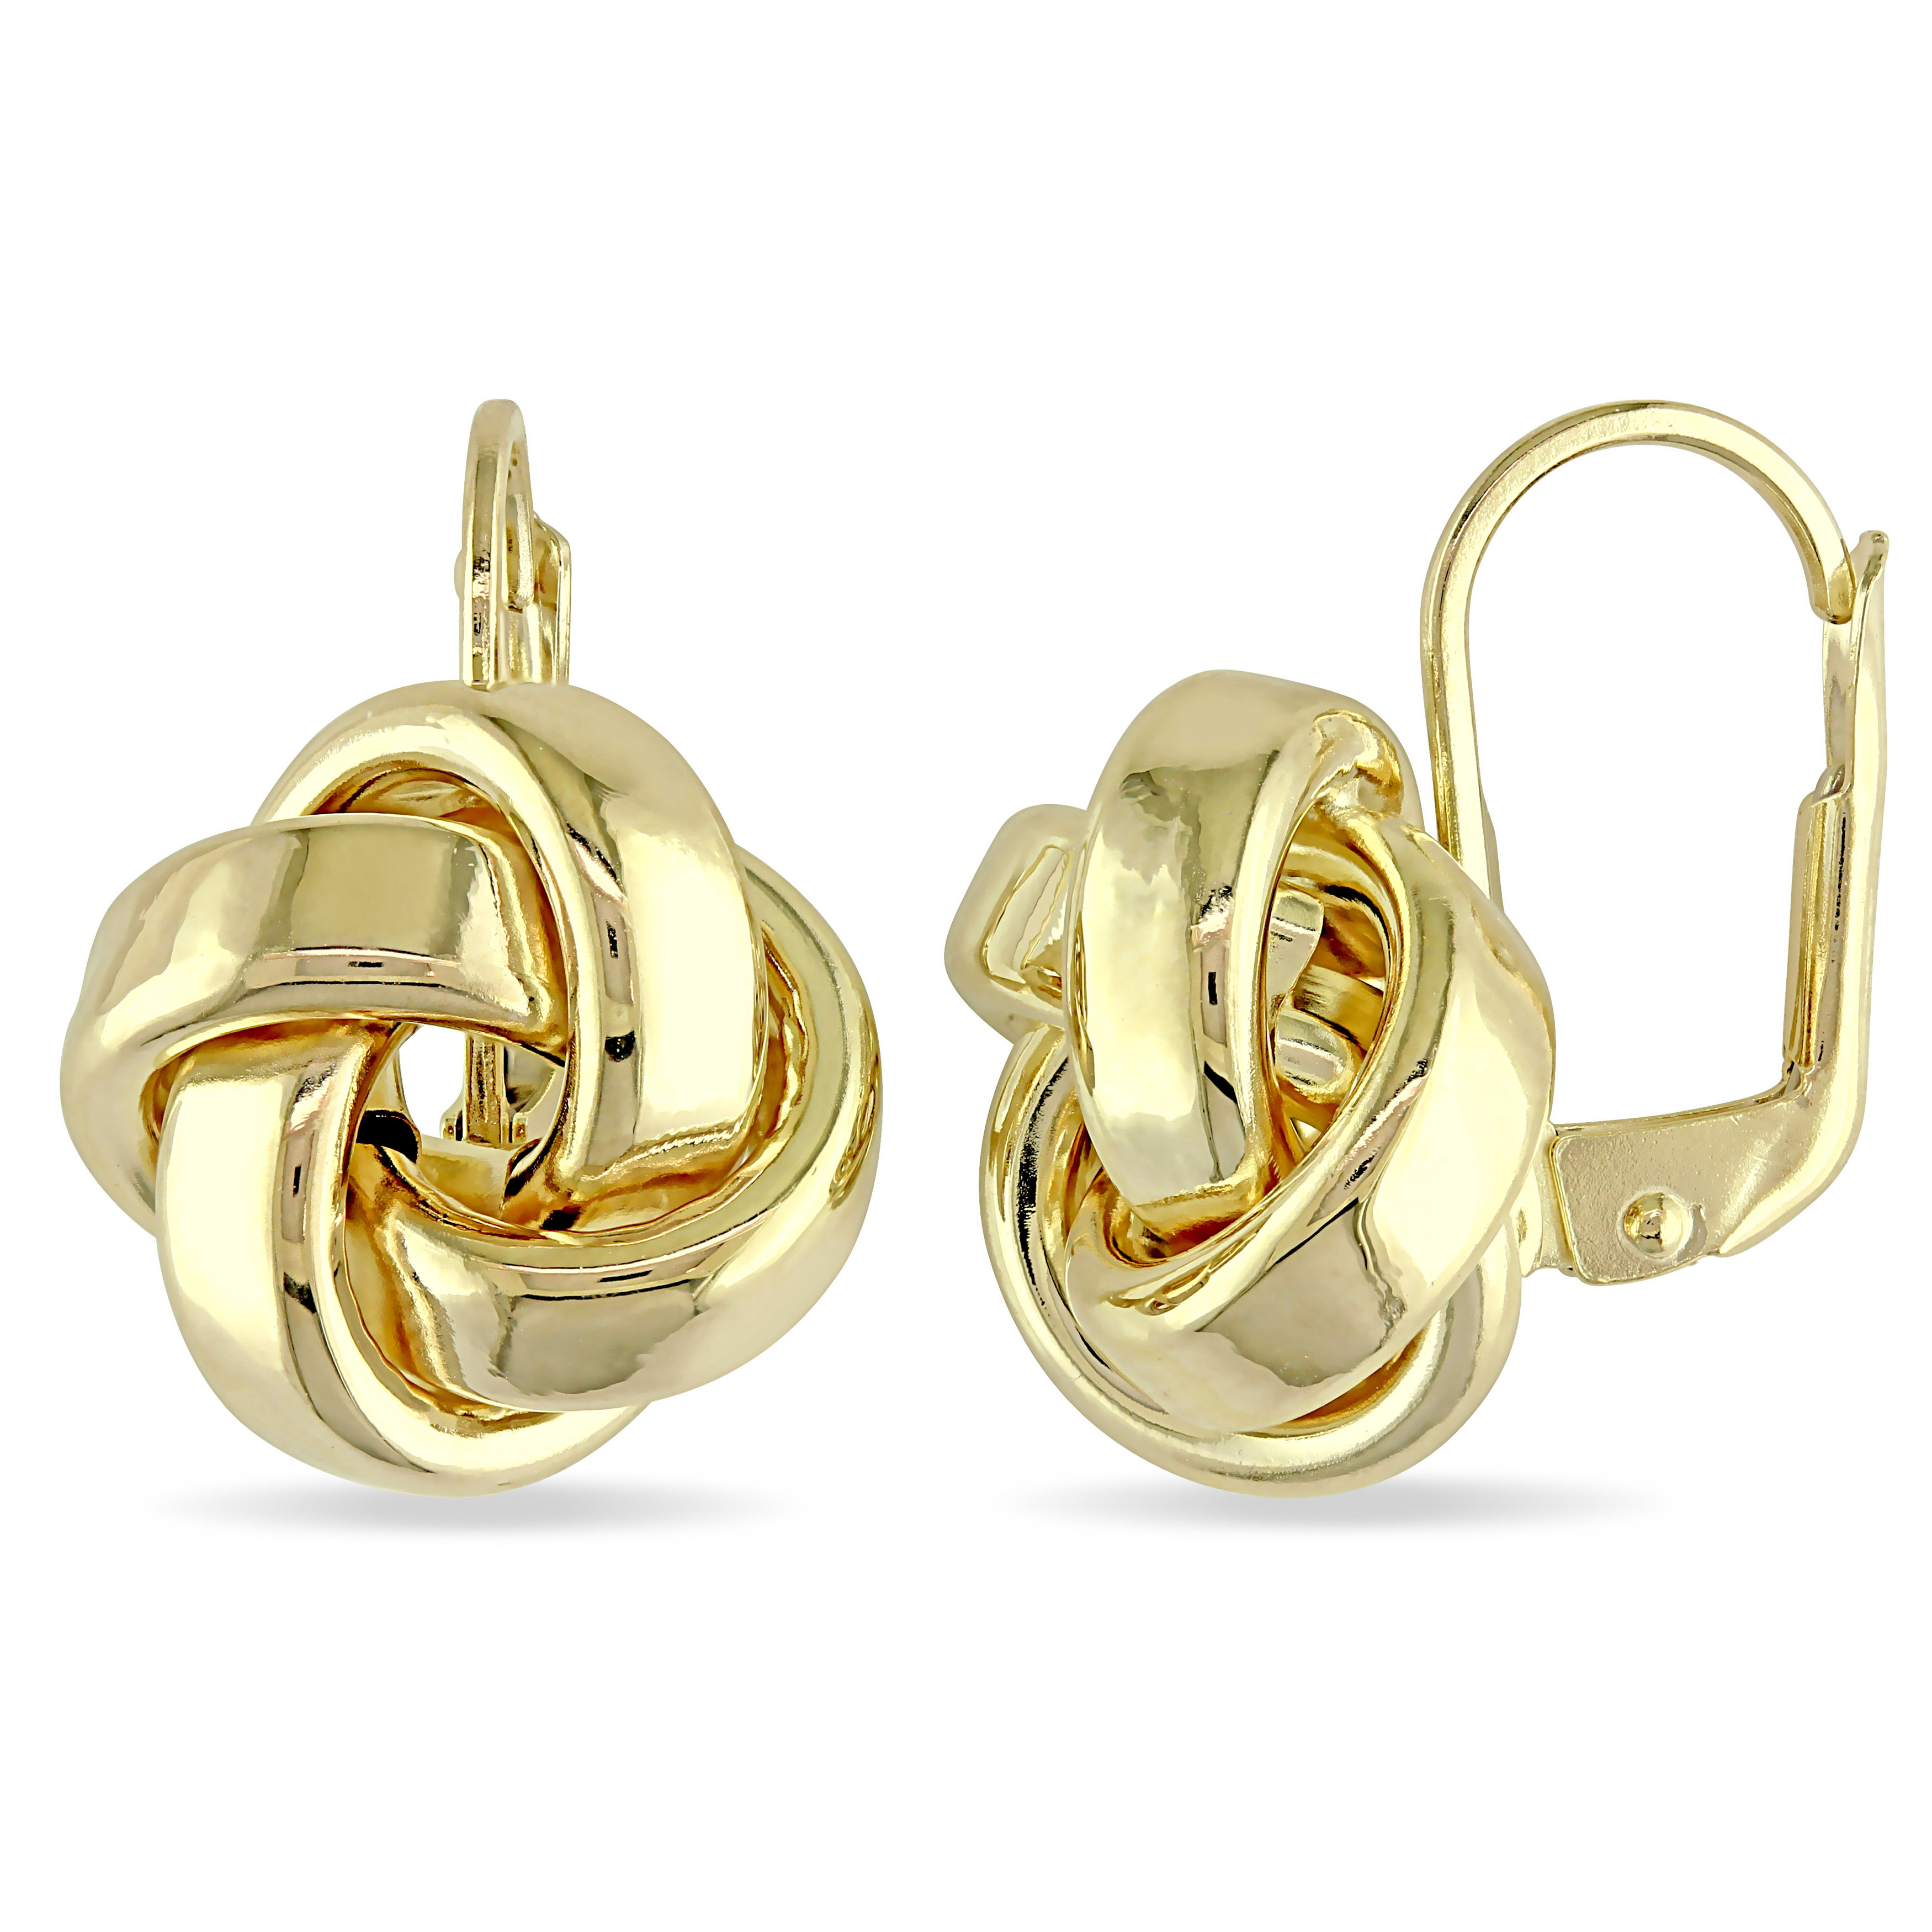 High Polish Love Knot Stud Earrings in Yellow Gold